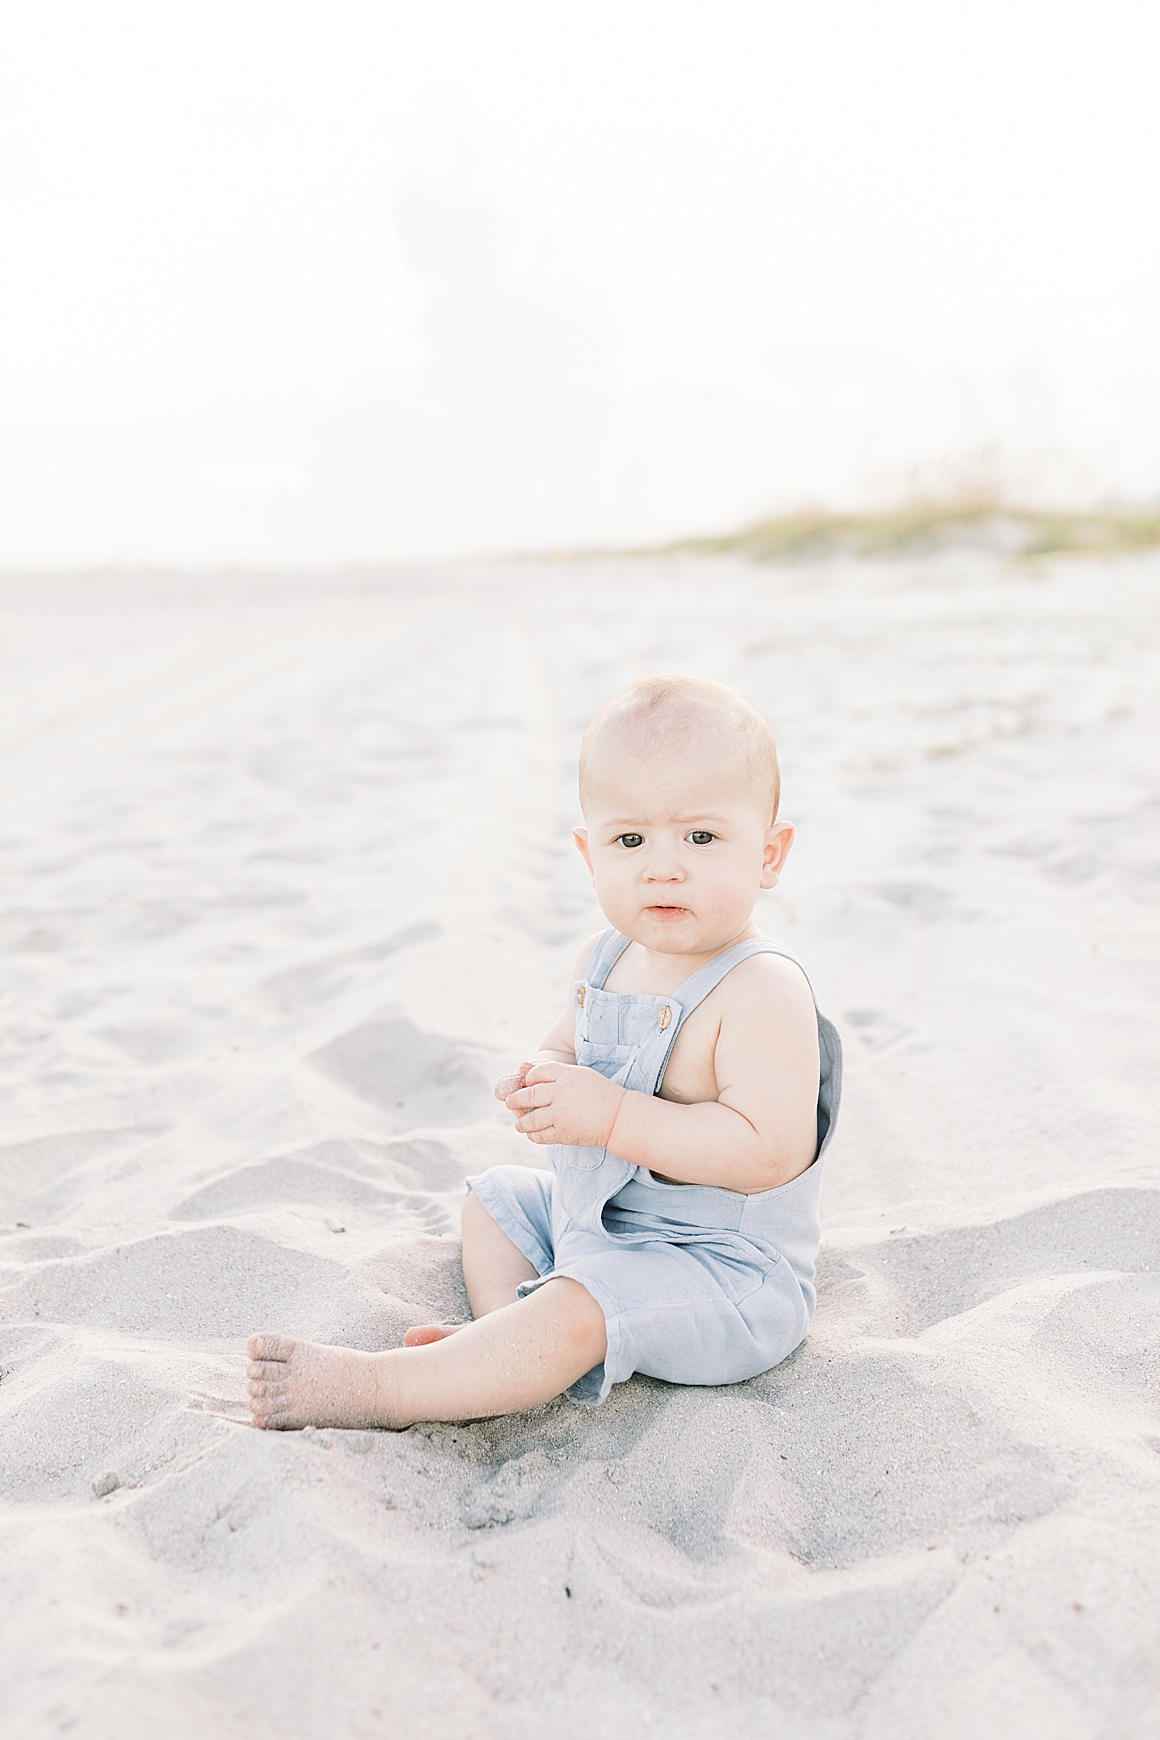 Little boy turns one and celebrates with a beach photoshoot in Charleston, SC. Photos by Caitlyn Motycka Photography